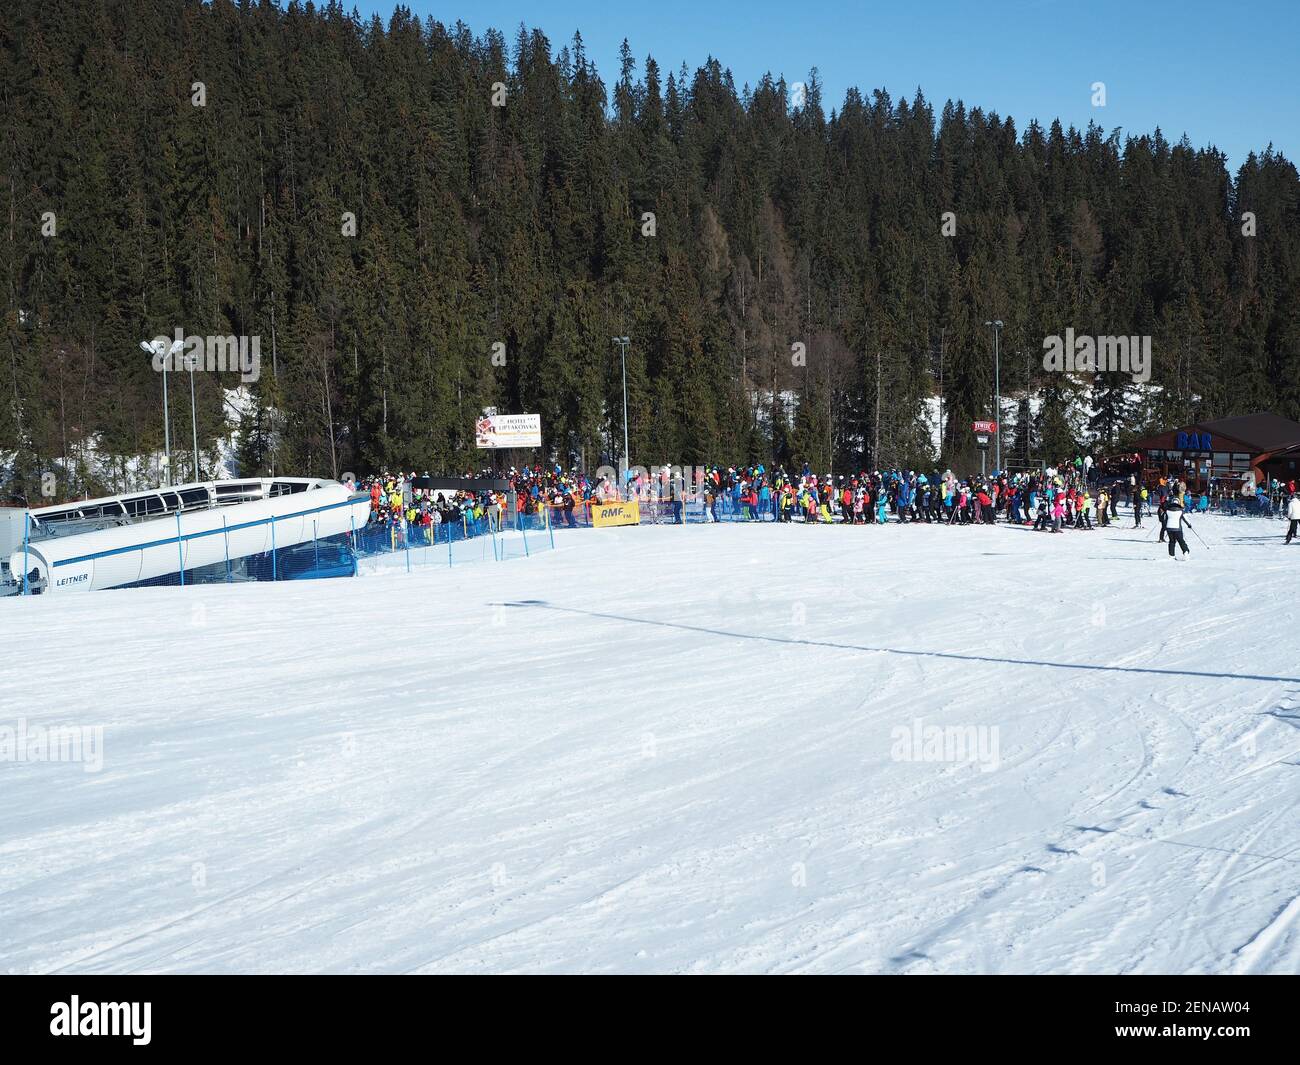 Białka Tatrzańska, Poland - February 23, 2021: A long que of skiers and snowboarders to the ski lift during a sunny weather Stock Photo